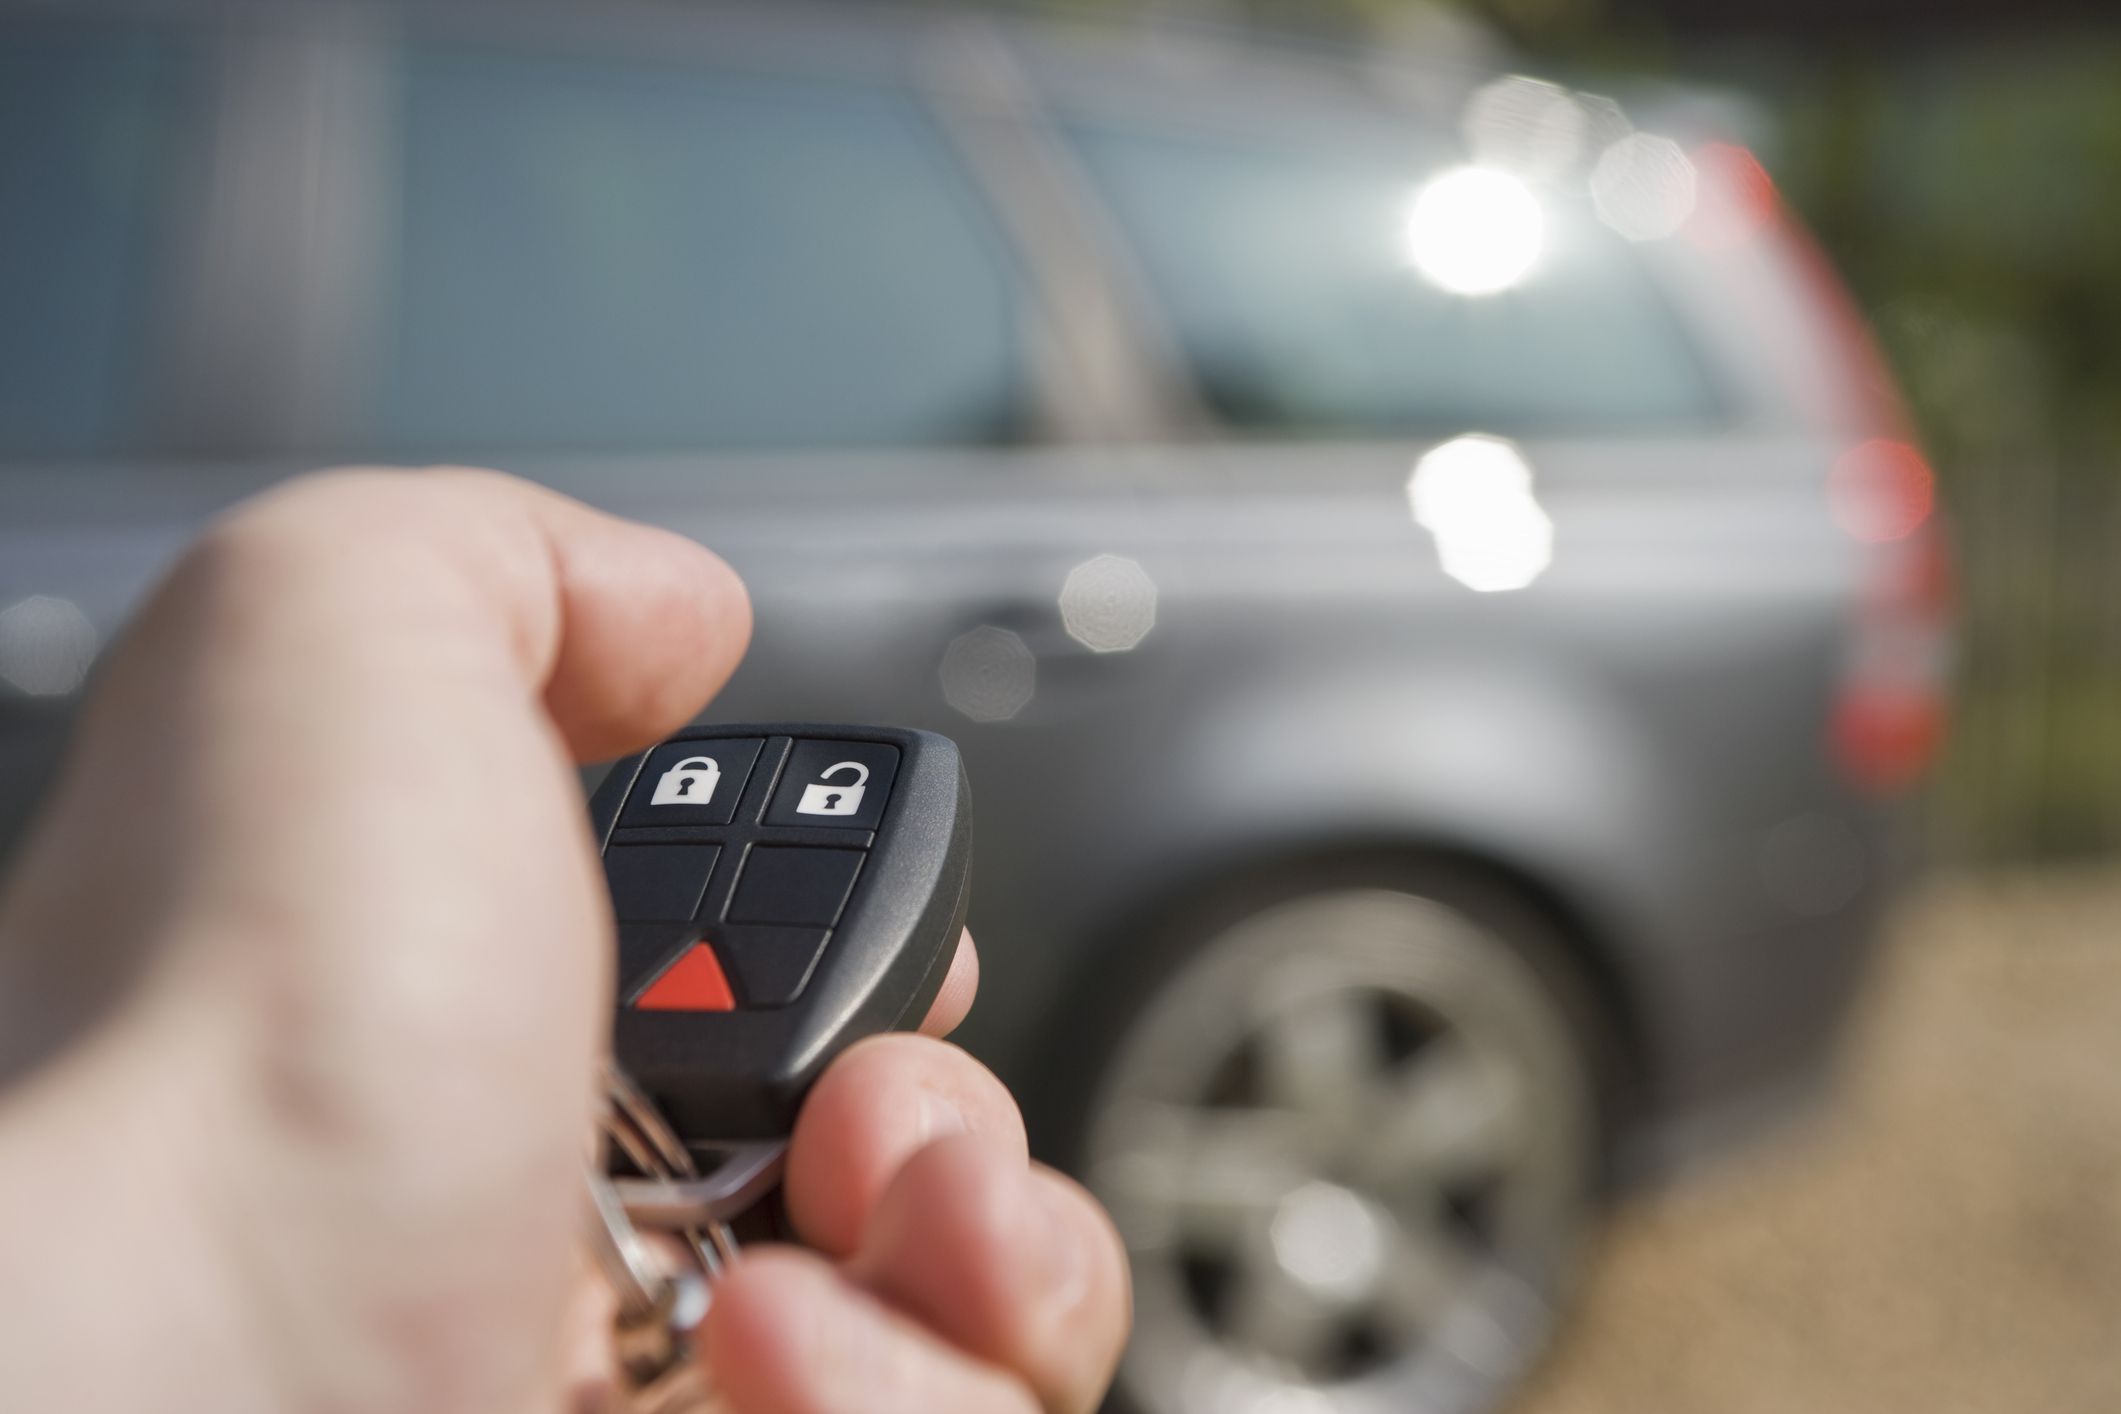 How many times can you remote start your car?